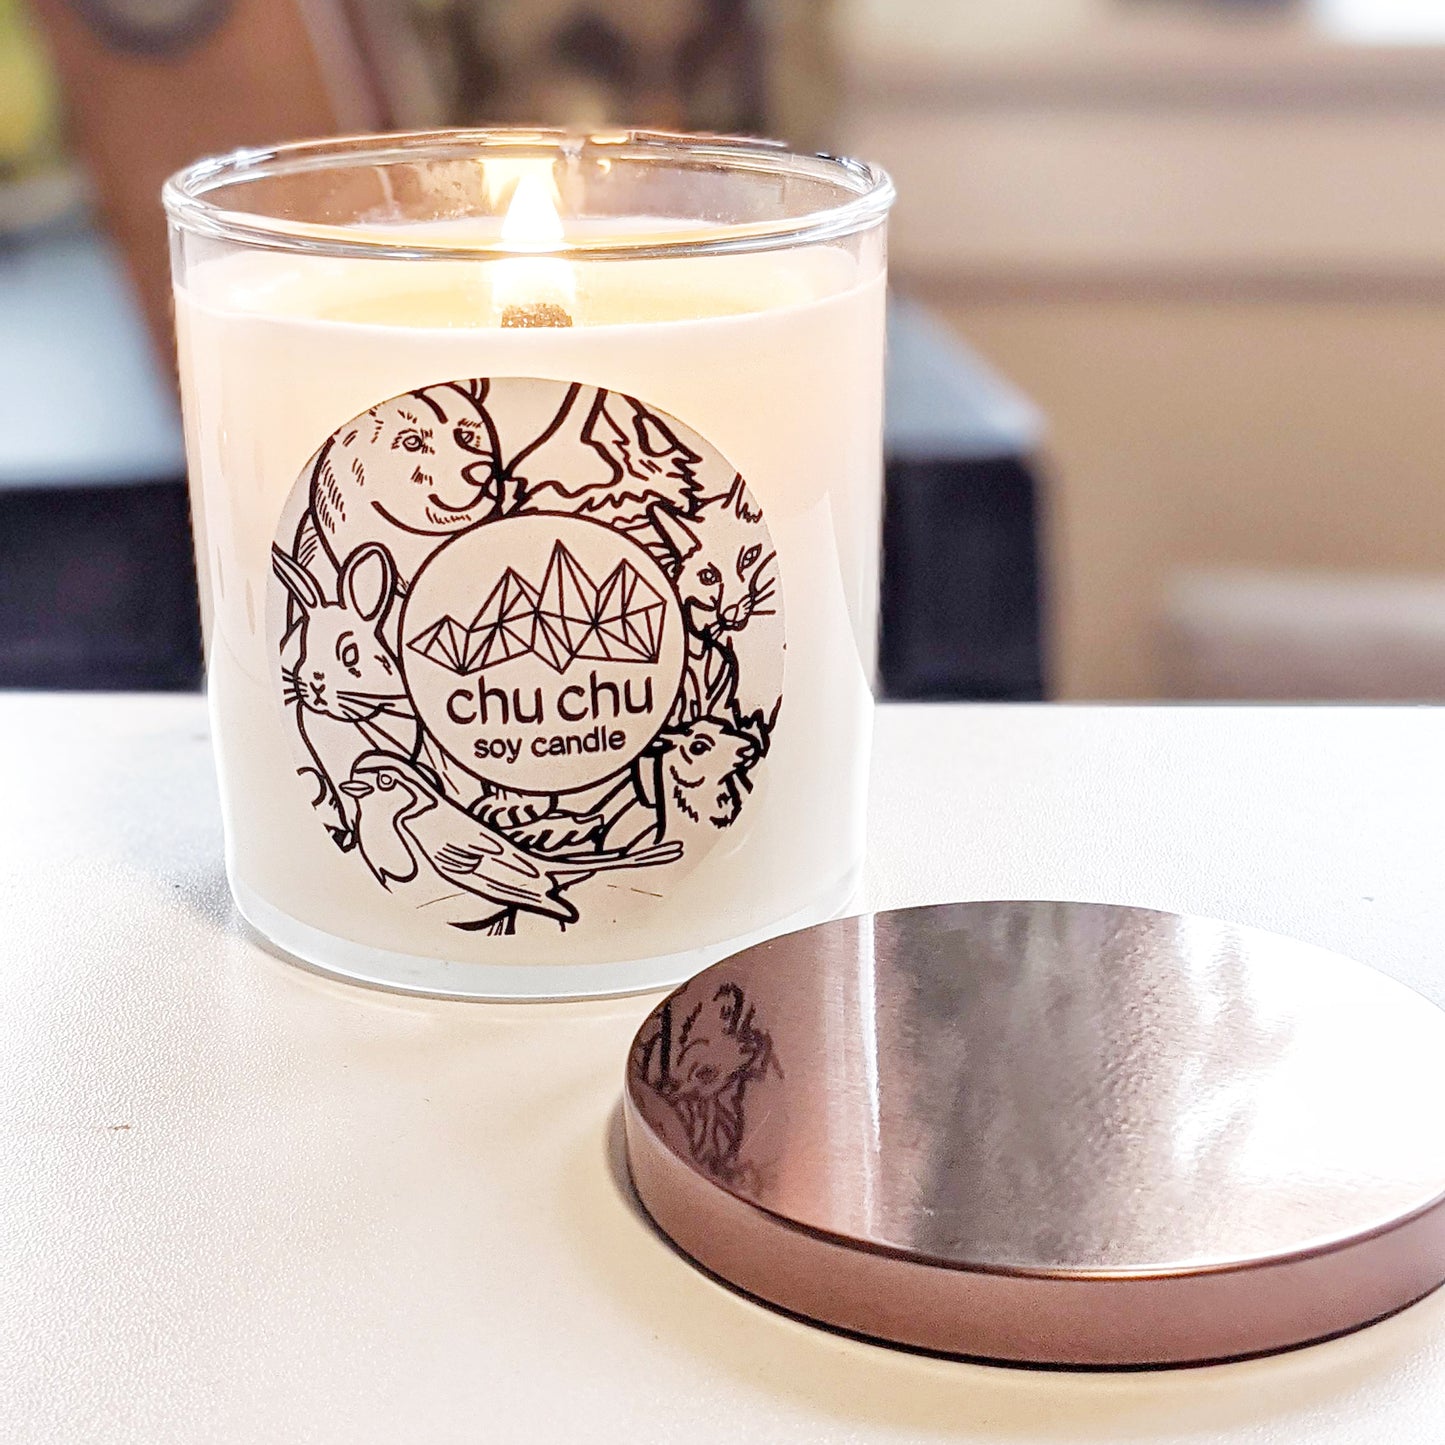 Chu Chu Soy Candle - Woodsy Scent with Crackling Wood Wick